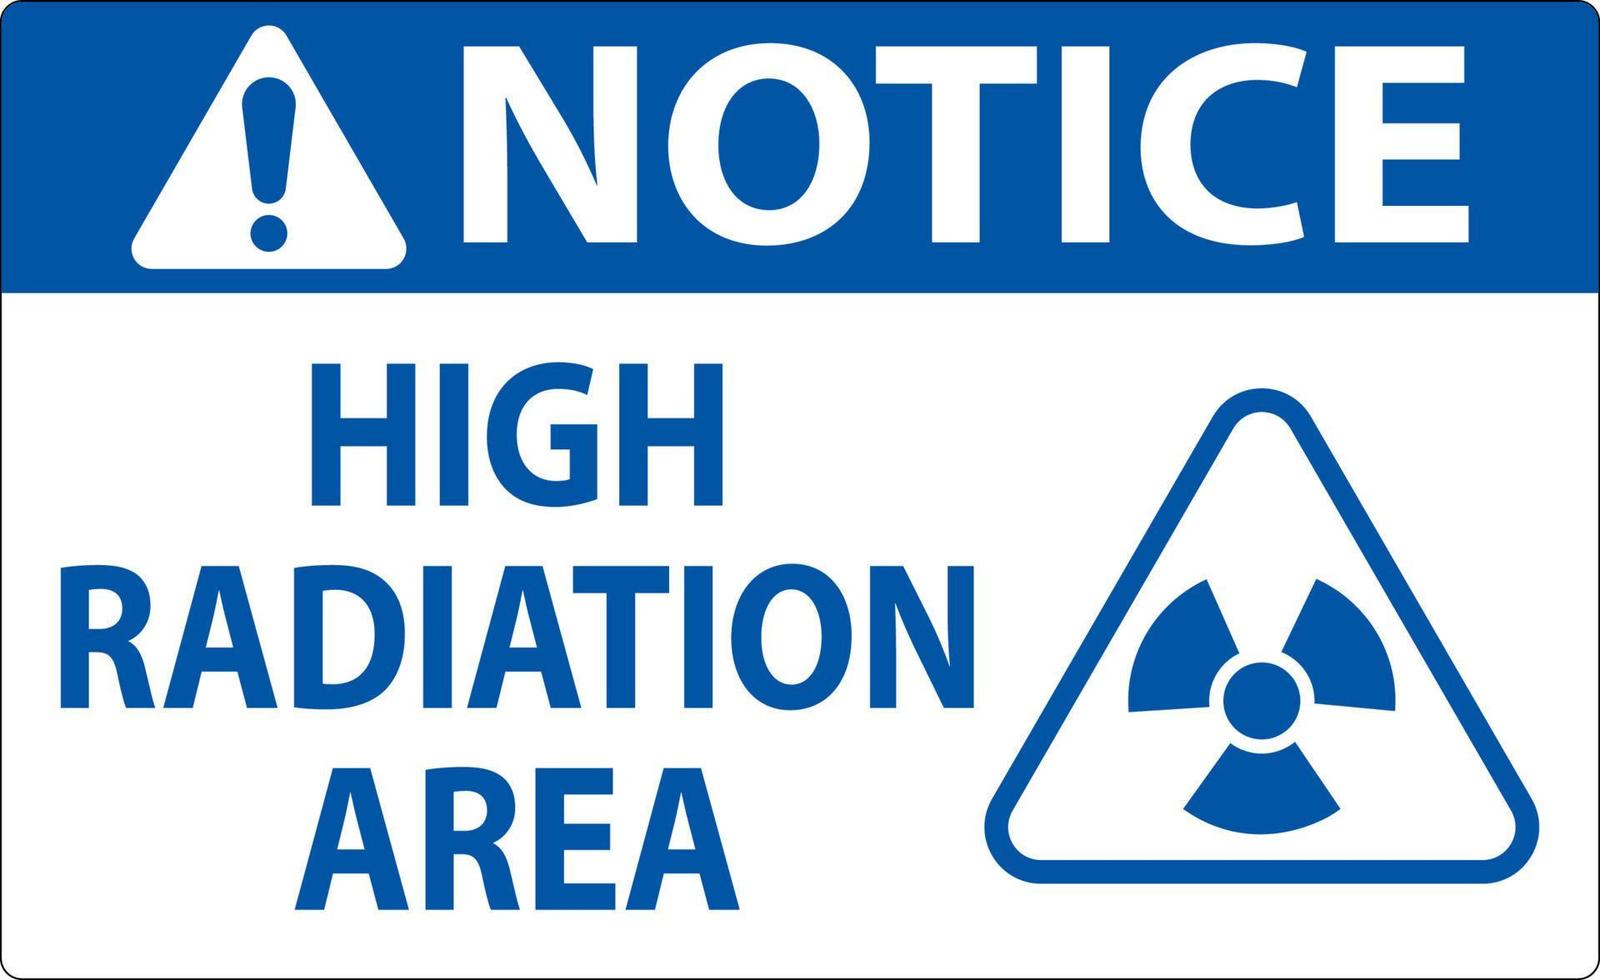 Notice High Radiation Area Sign On White Background vector